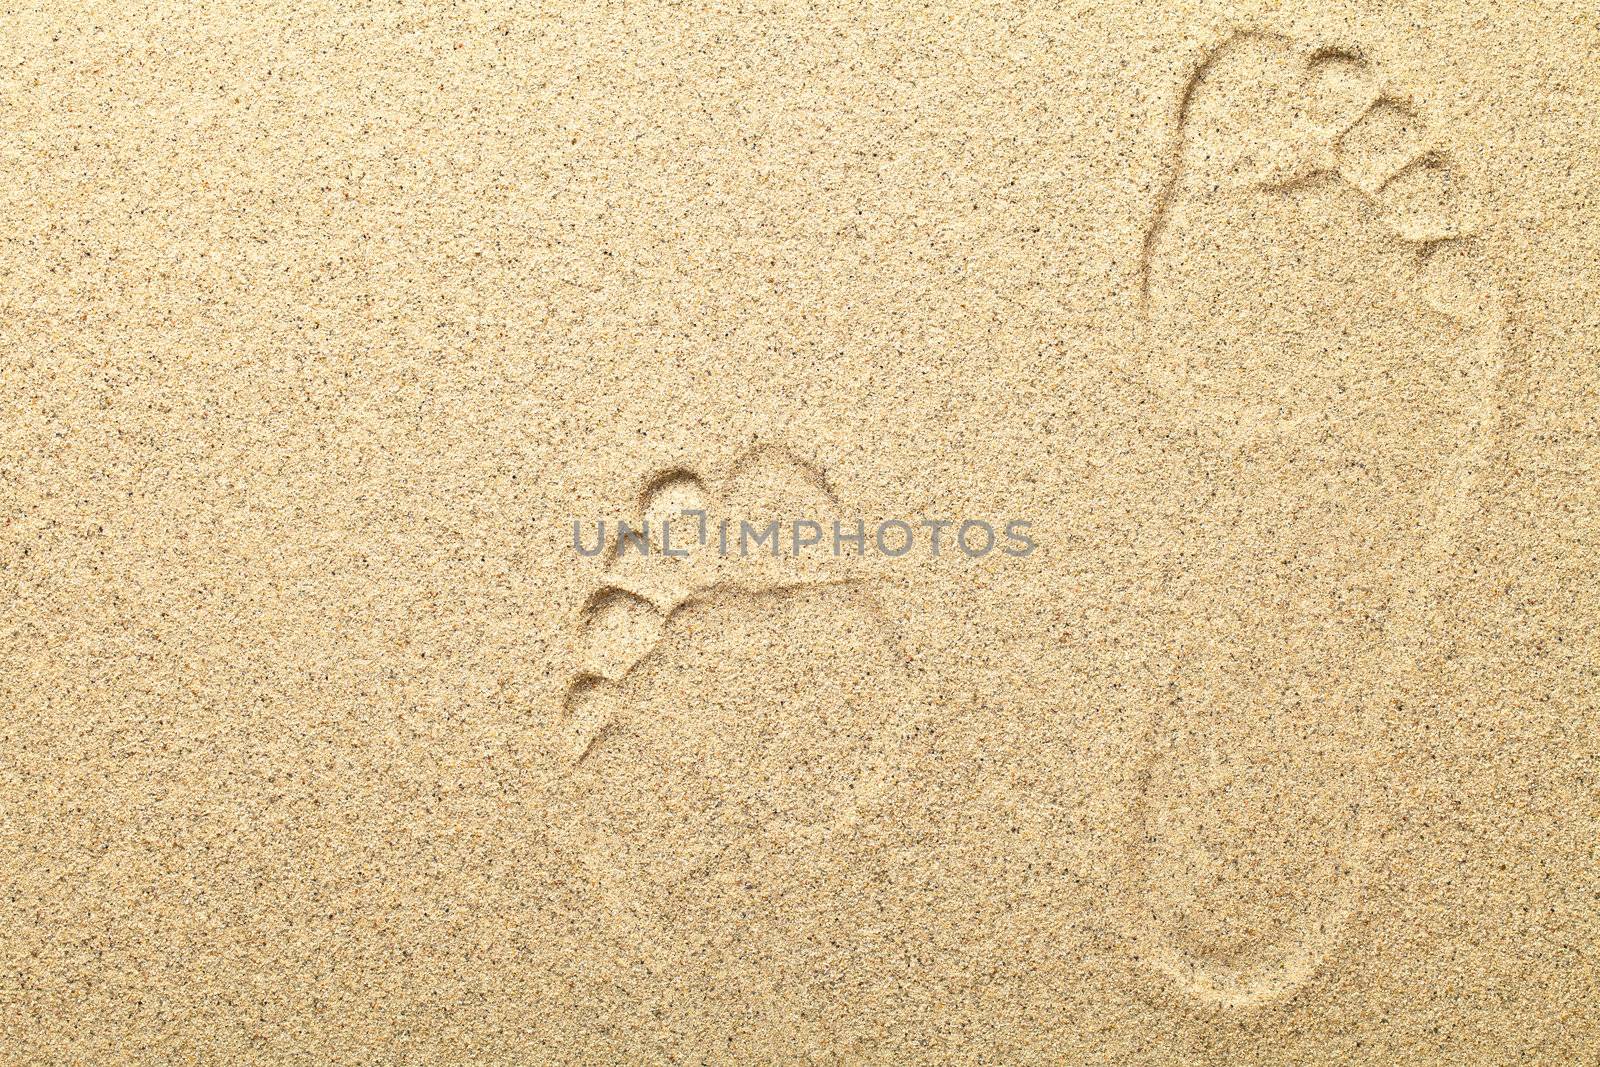 Sandy beach background with footprints. Copy space, macro shot 